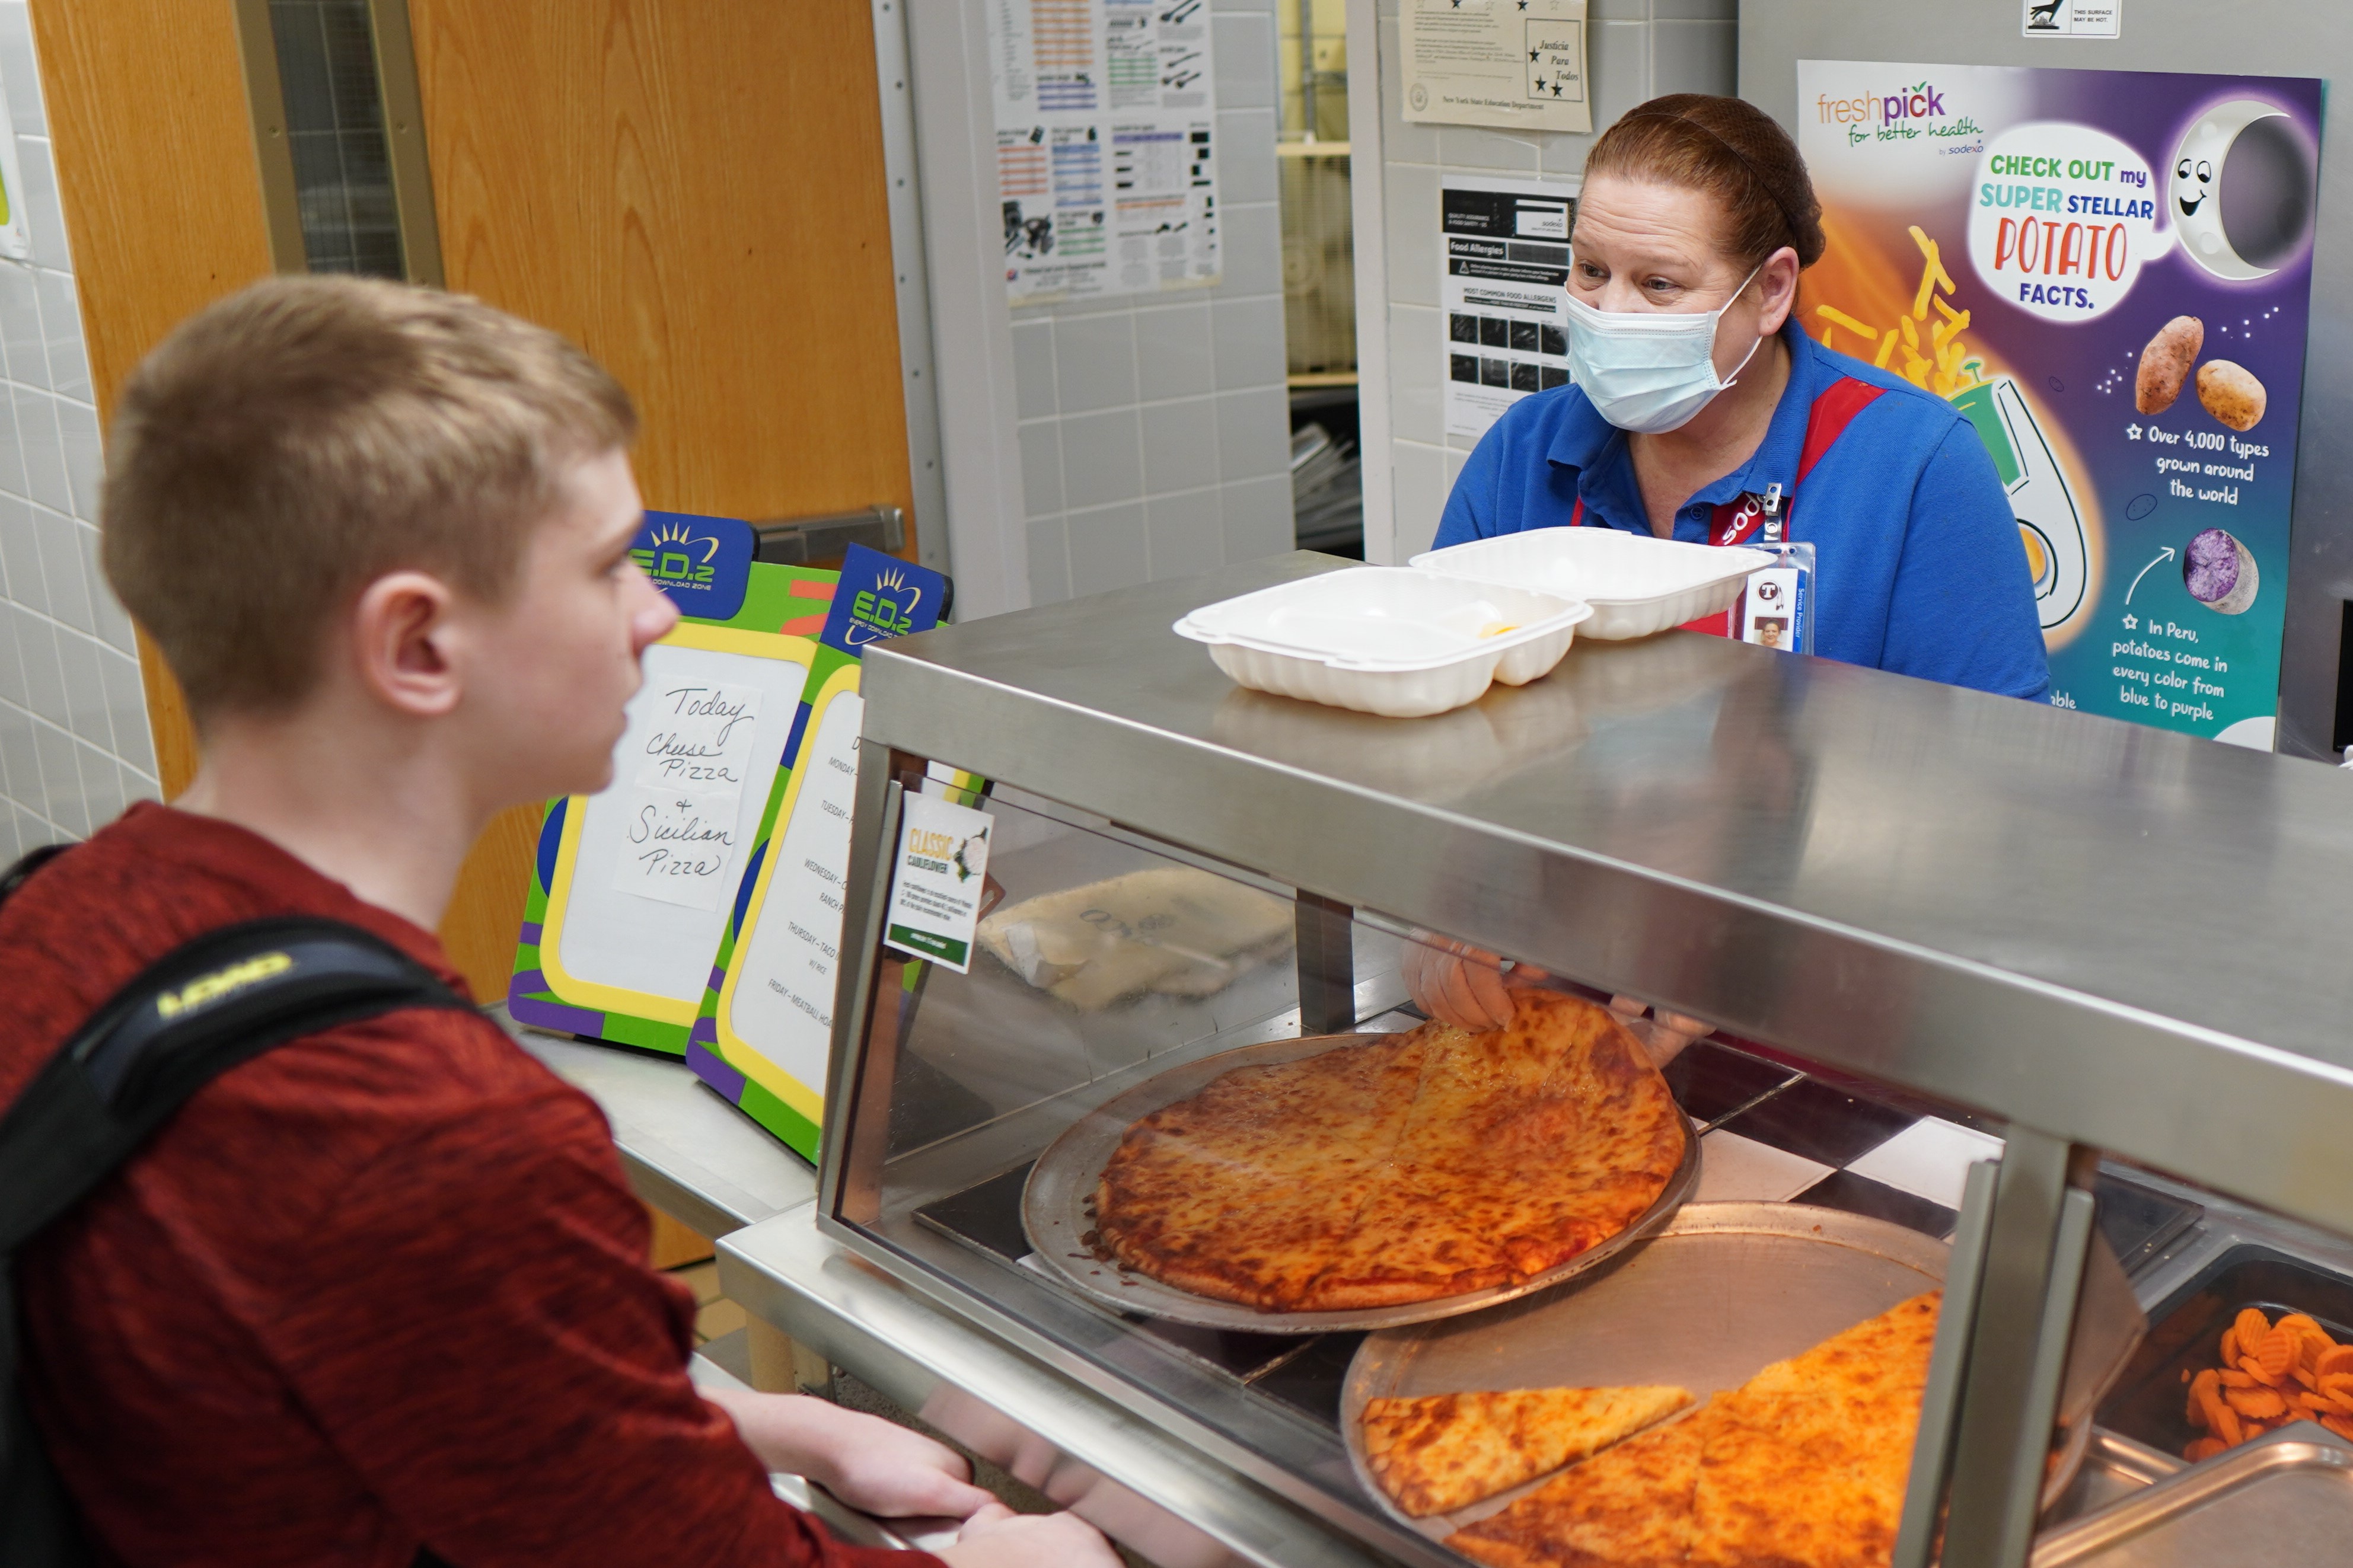 Student going through the lunch line at Tonawanda Middle School.